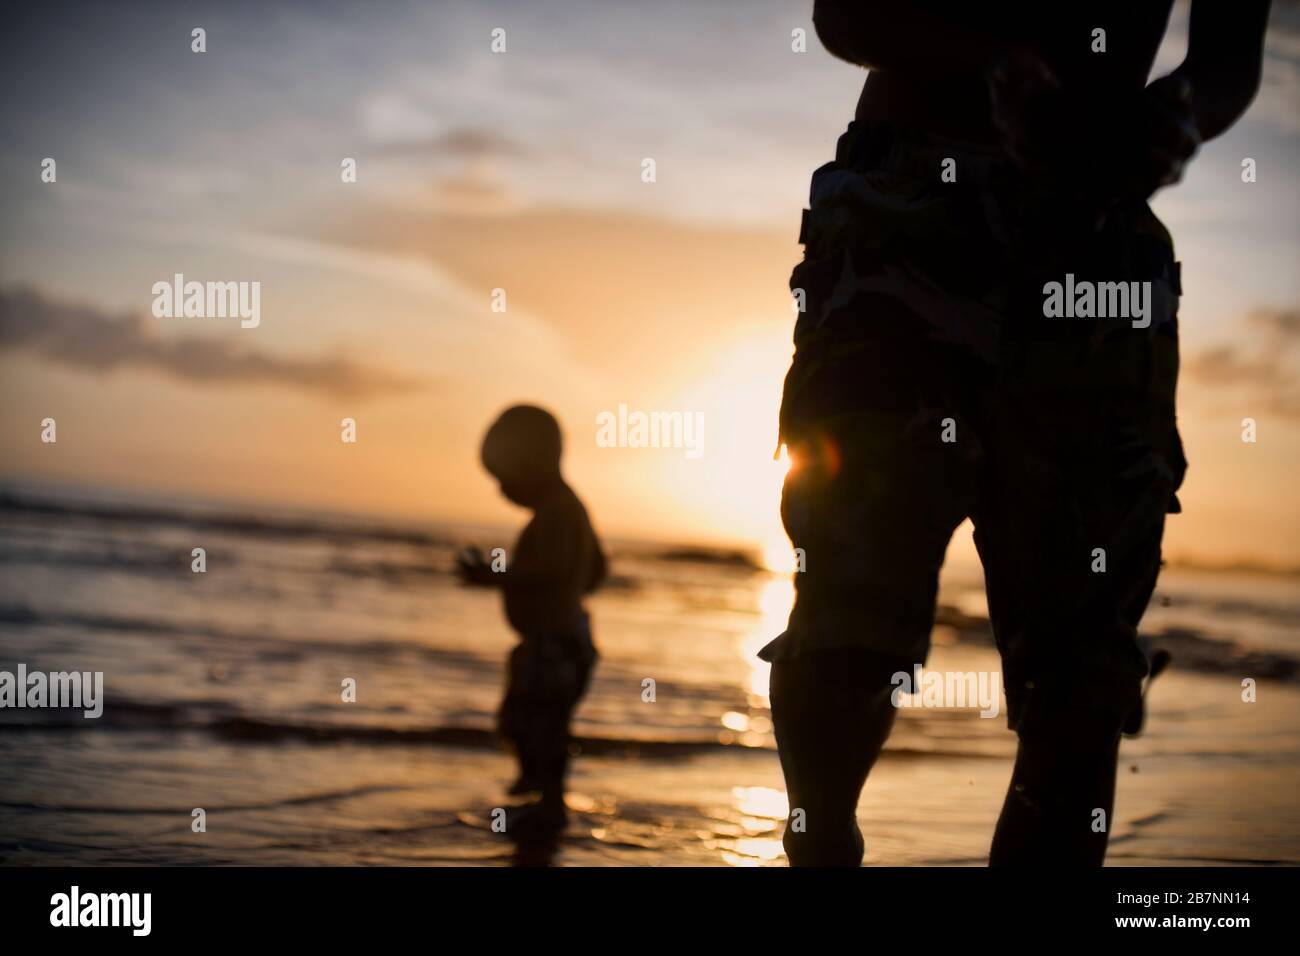 Young boy standing in water at the beach at sunset. Stock Photo